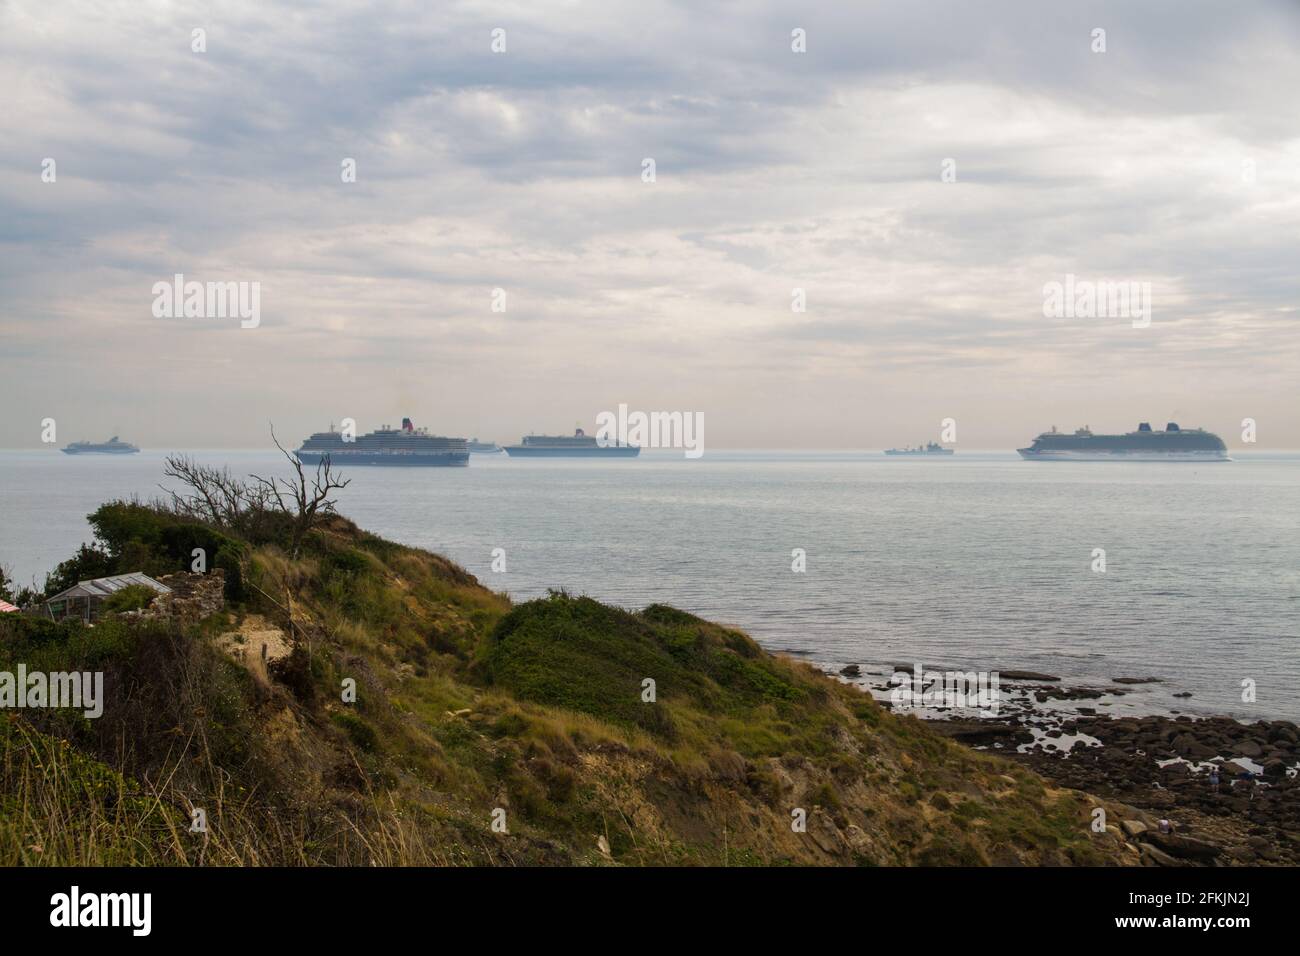 WEYMOUTH - AUGUST 16 2020: Cruise Ships, moored off Dorset, England due to Covid 19 Pandemic, landscape Stock Photo